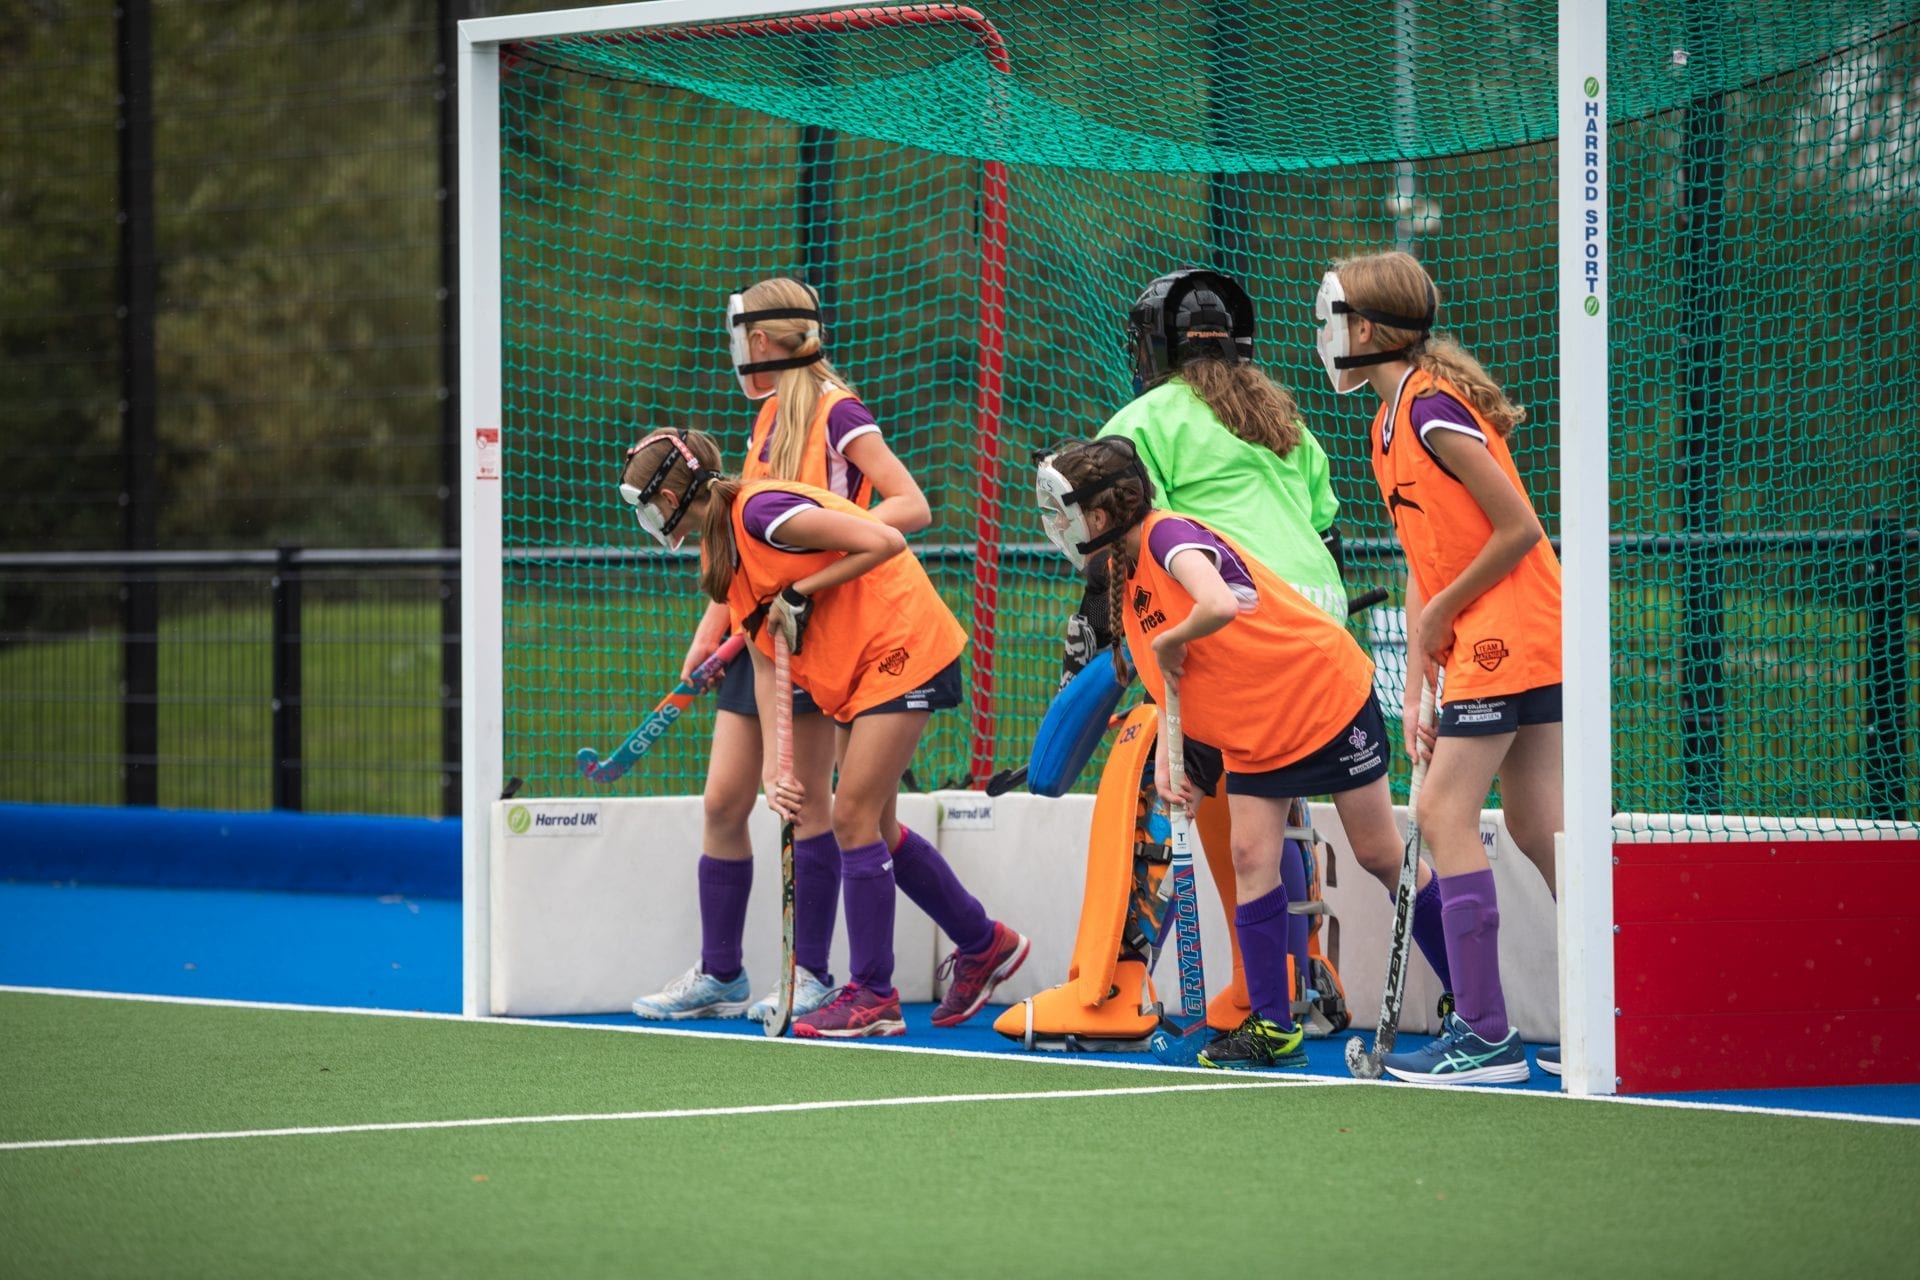 King's College students playing hockey